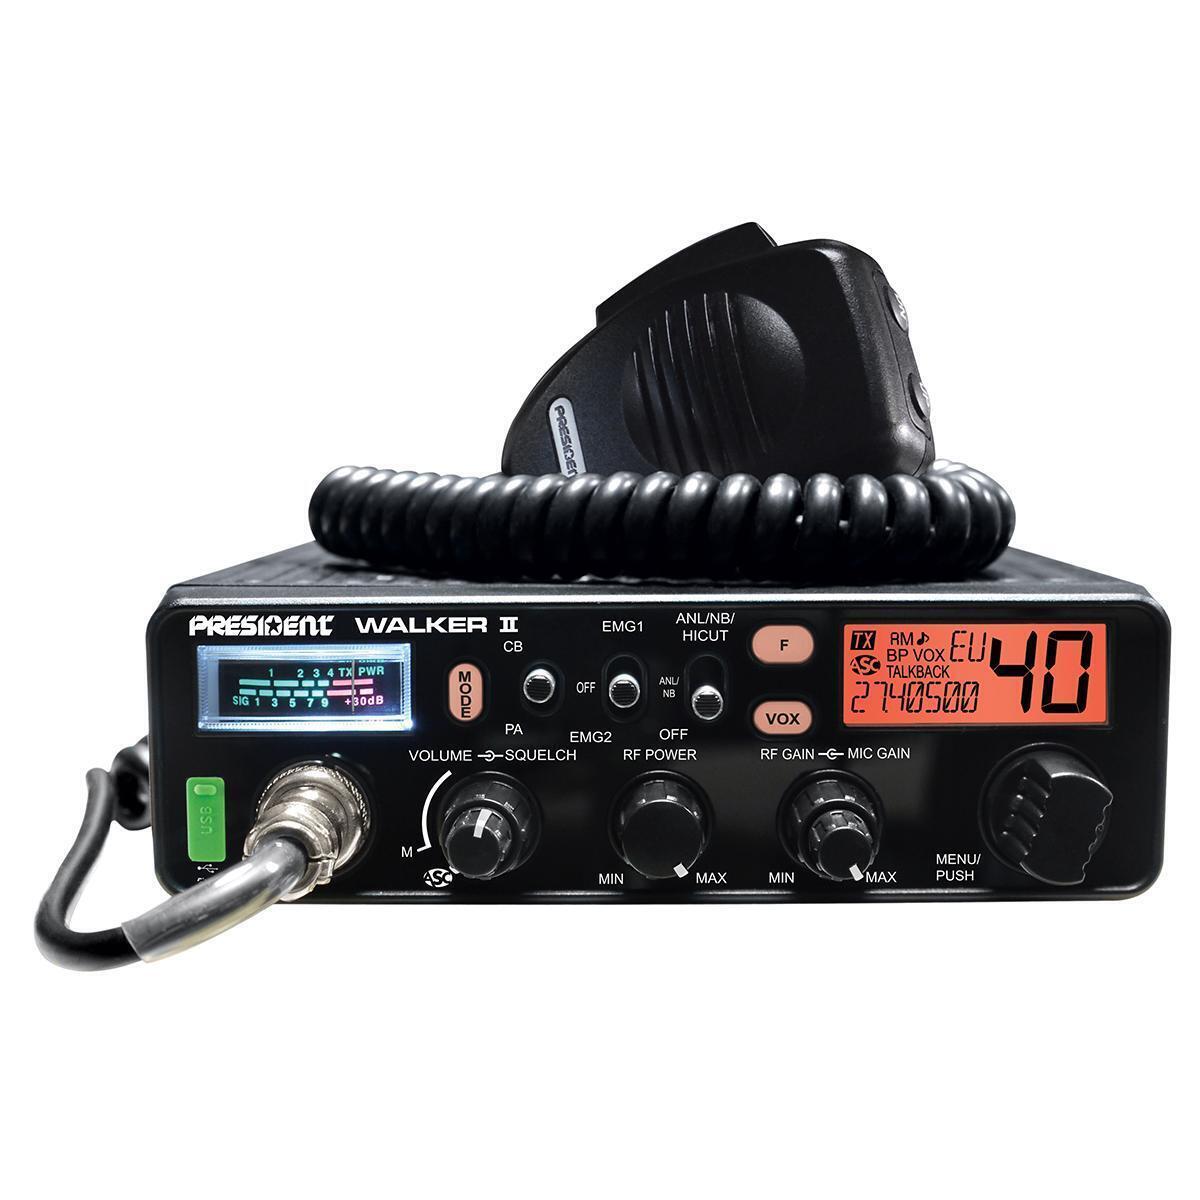 President Electronics WALKERIII Walker FCC CB Radio - 40 Channel Weather Alert & Auto Squelch Control Compact Radio for Truckers, Black